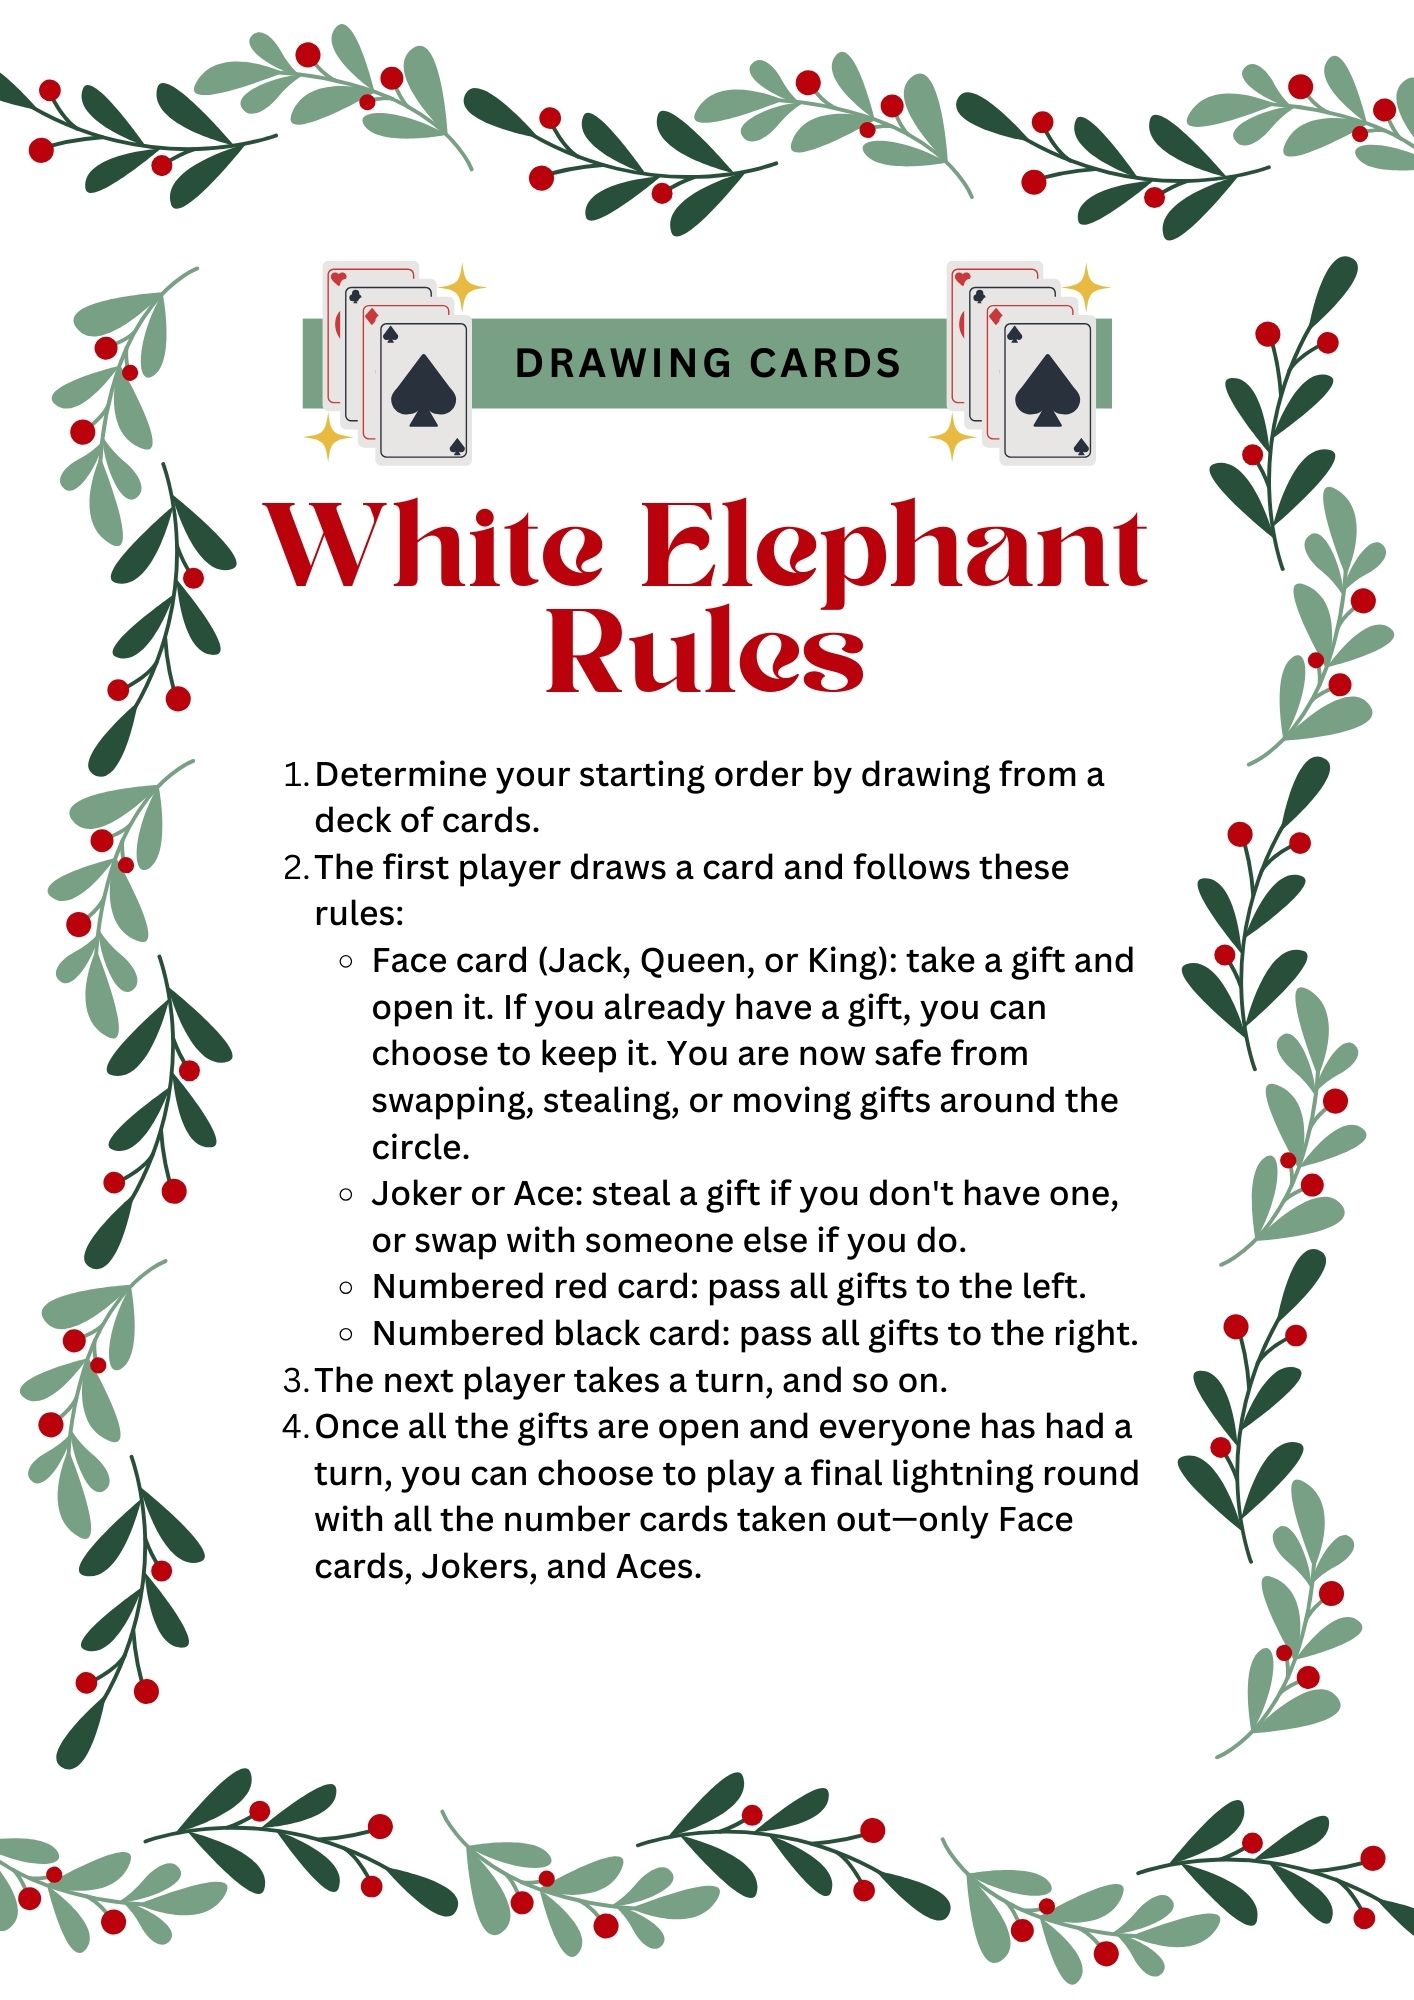 https://images.fun.com/blog/880/drawing-cards-white-elephant-rules.jpg